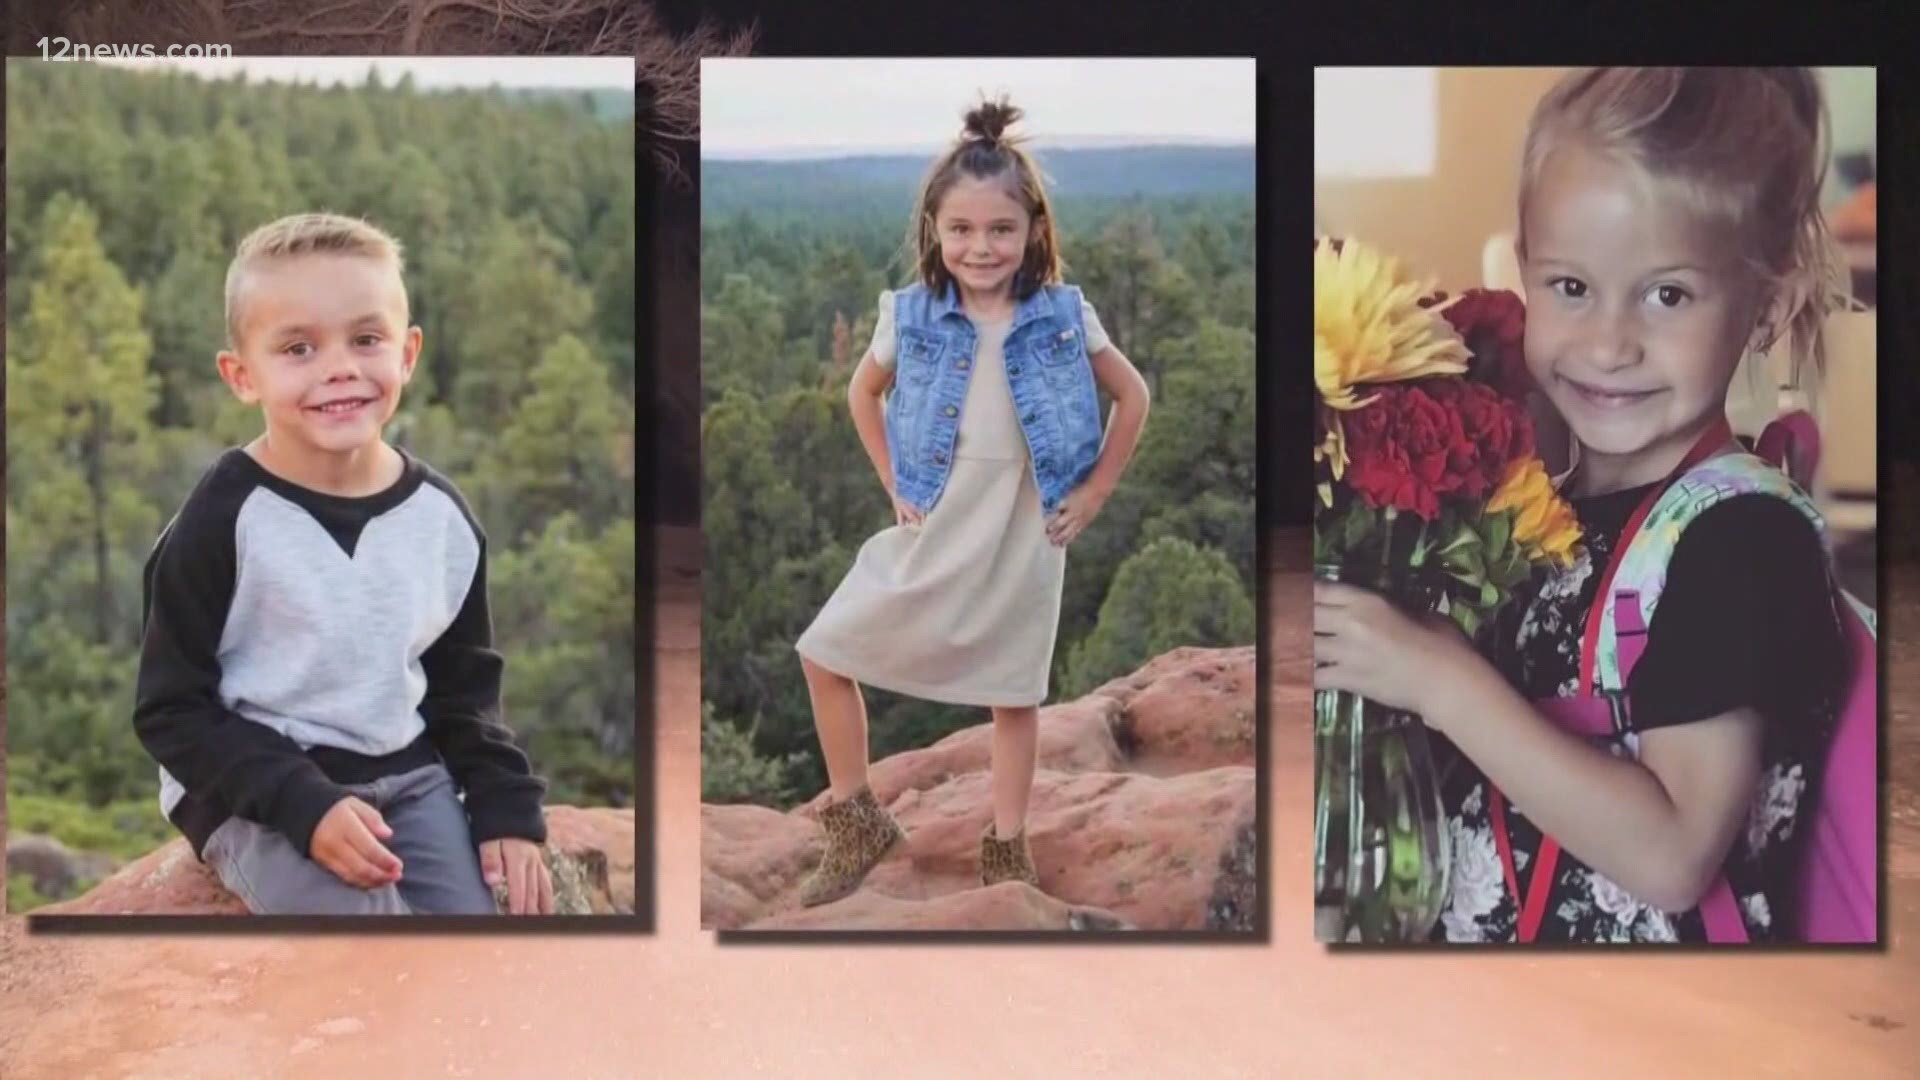 Federal officials are putting $21 million toward building a bridge over Tonto Creek nearly a year after three children died in floodwaters.